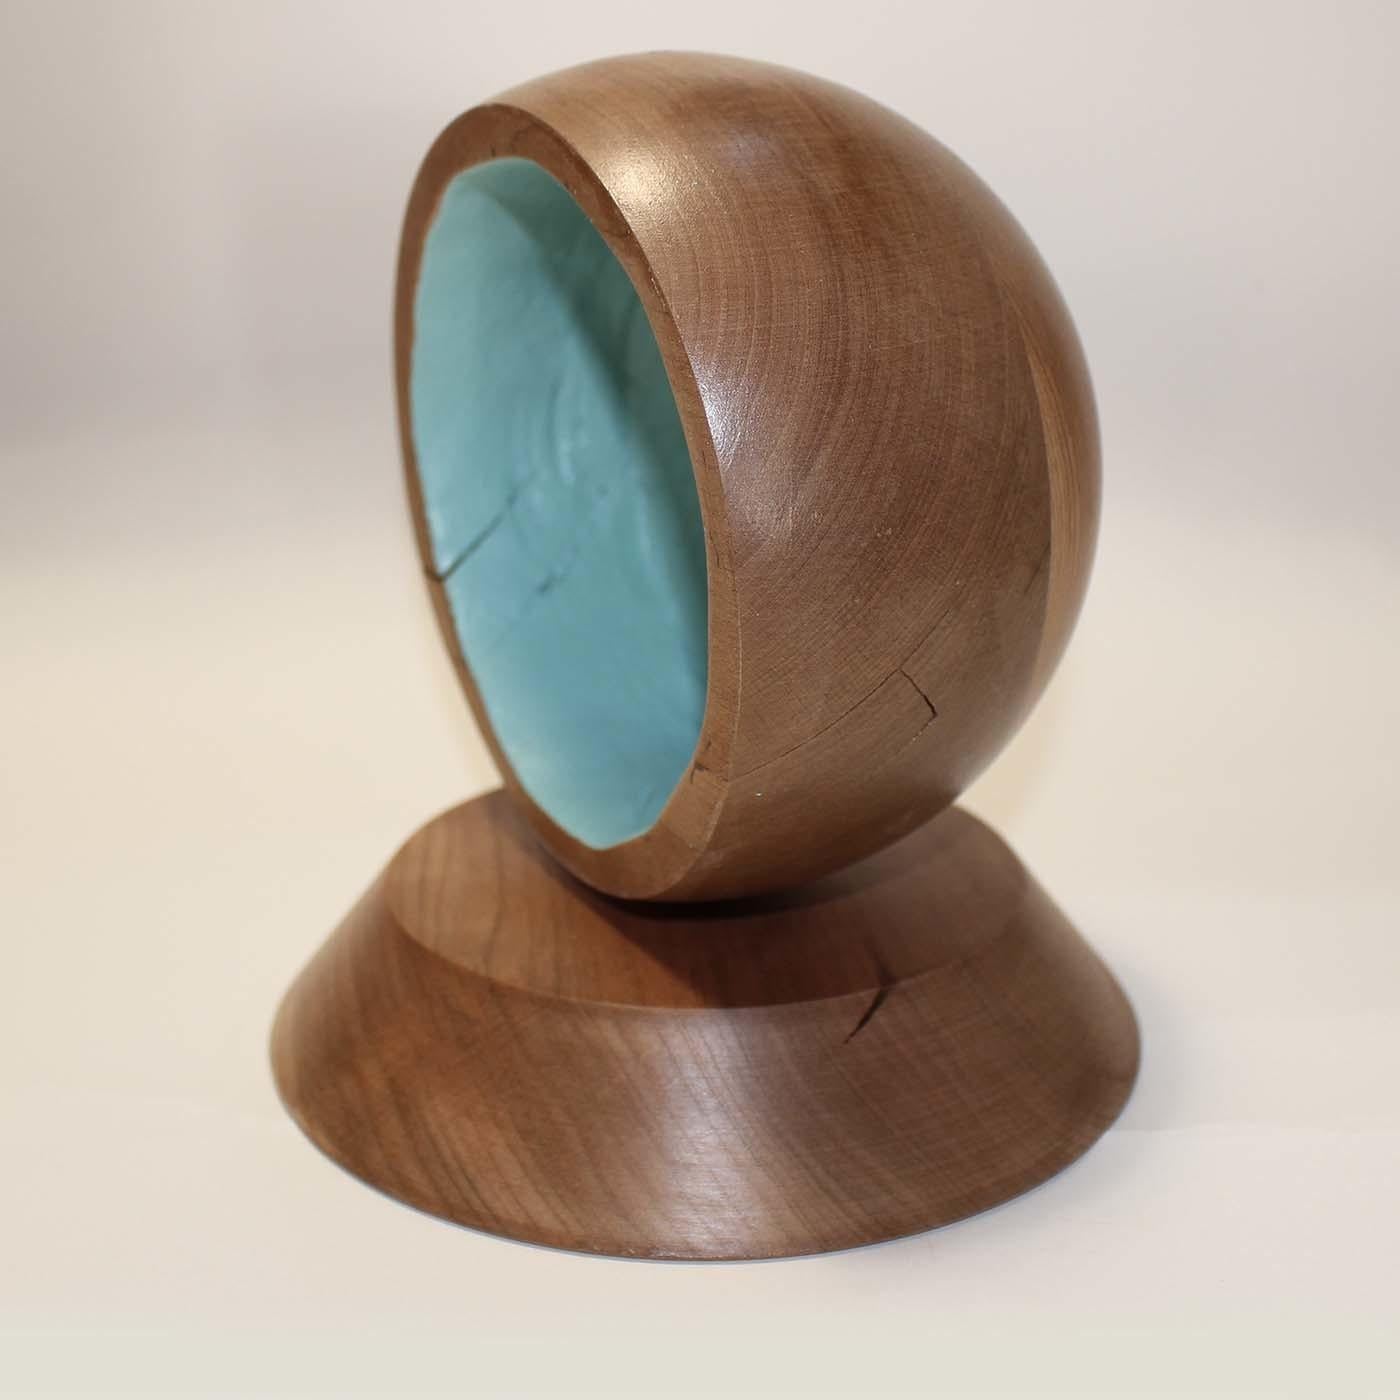 This decorative object features a half-sphere top with a truncated cone base entirely handcrafted of lathe-turned cherry. The concave section of the top is decorated by hand in vivid turquoise that adds a contrast color and a modern flair. Finished